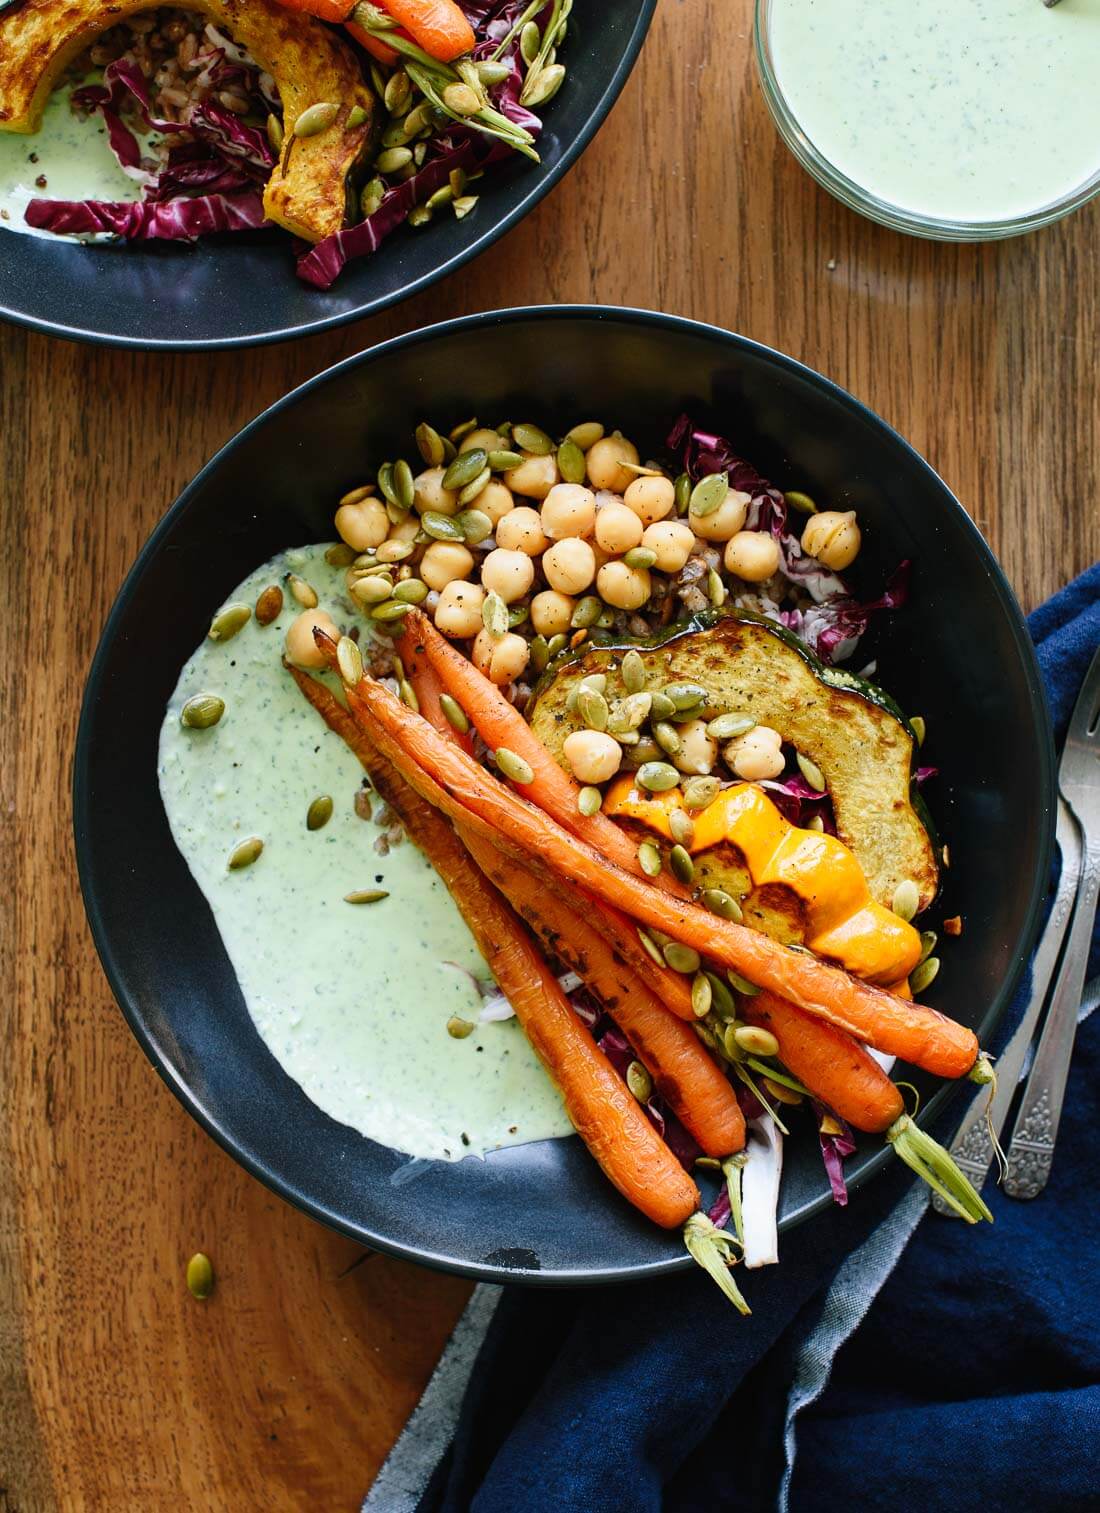 These farmers' market bowls feature roasted veggies, warm whole grains, chickpeas and a creamy yogurt-based green goddess sauce - cookieandkate.com